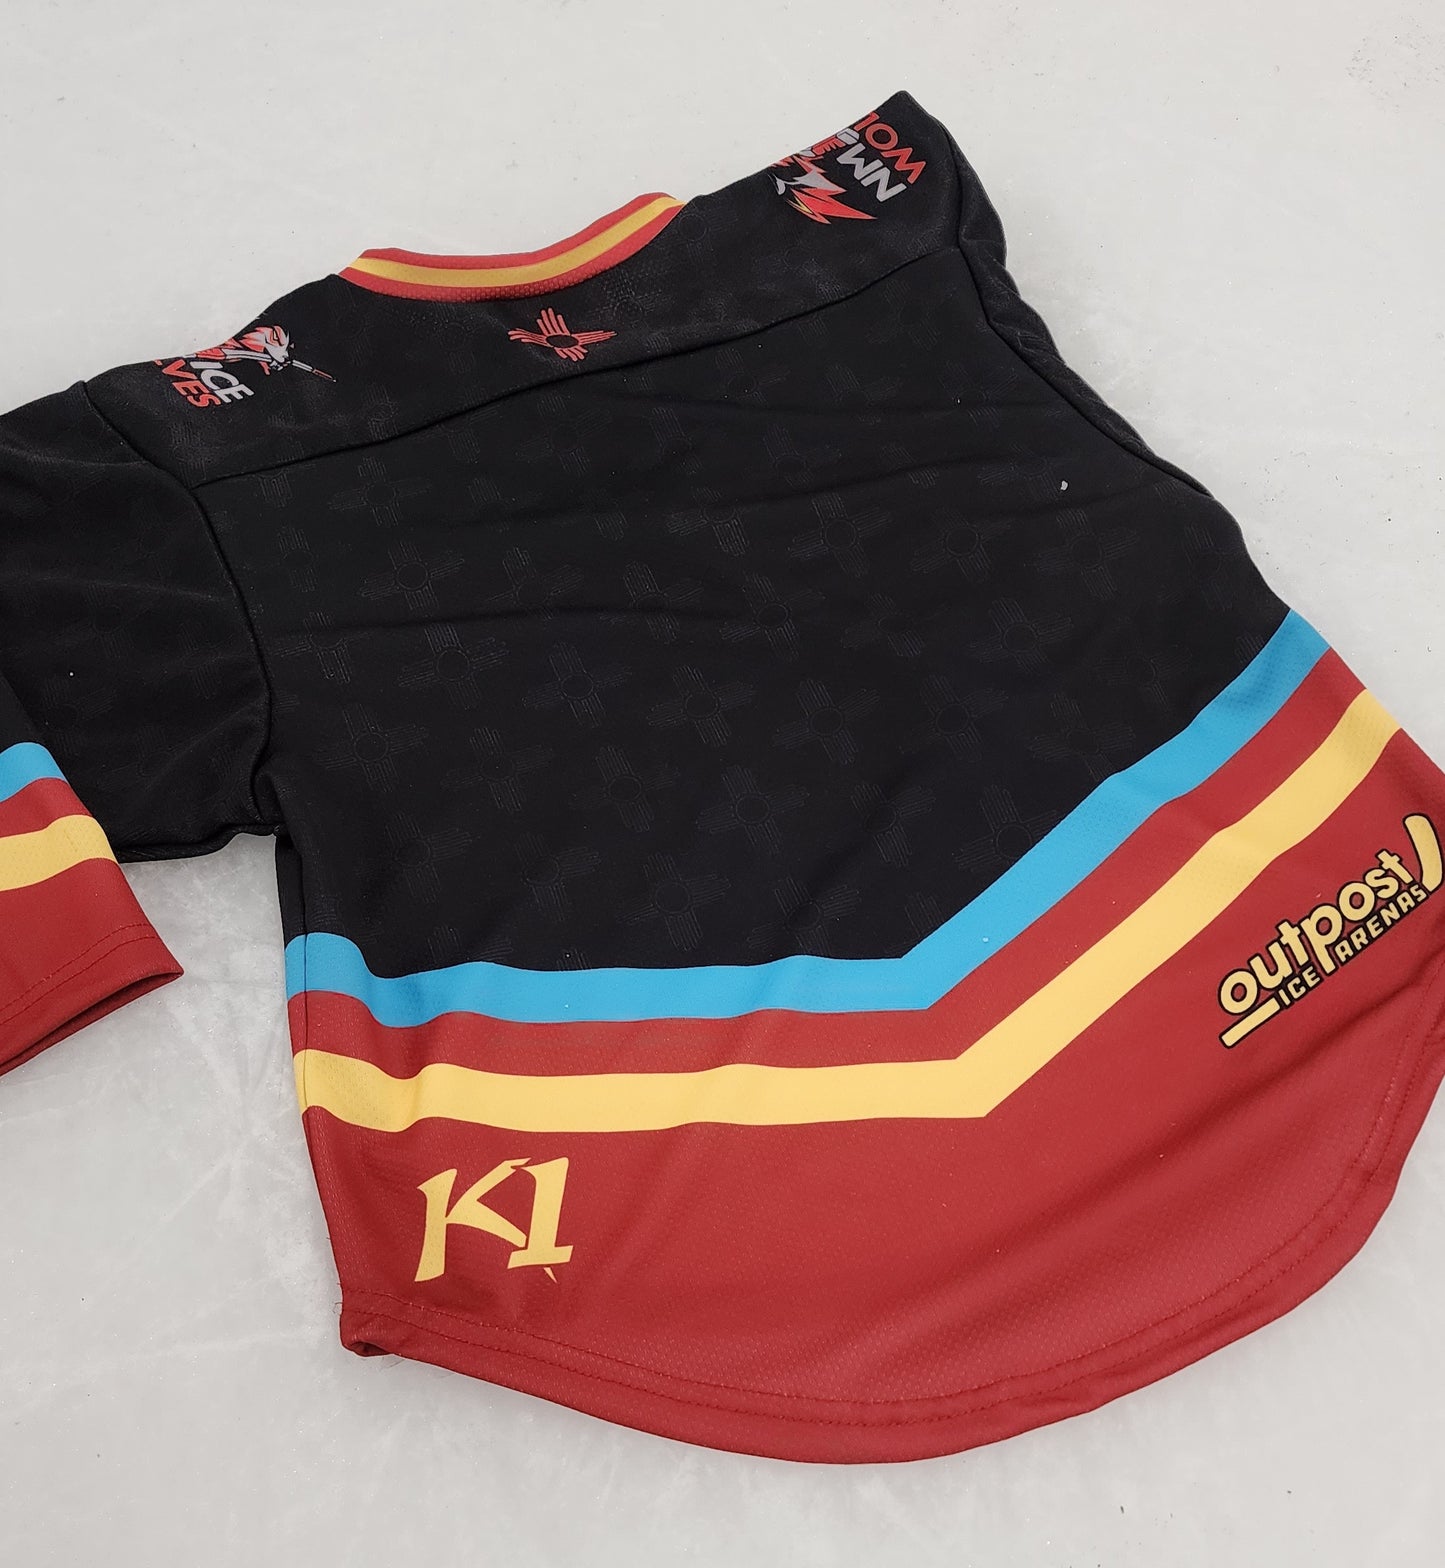 NMIW Sublimated Jersey